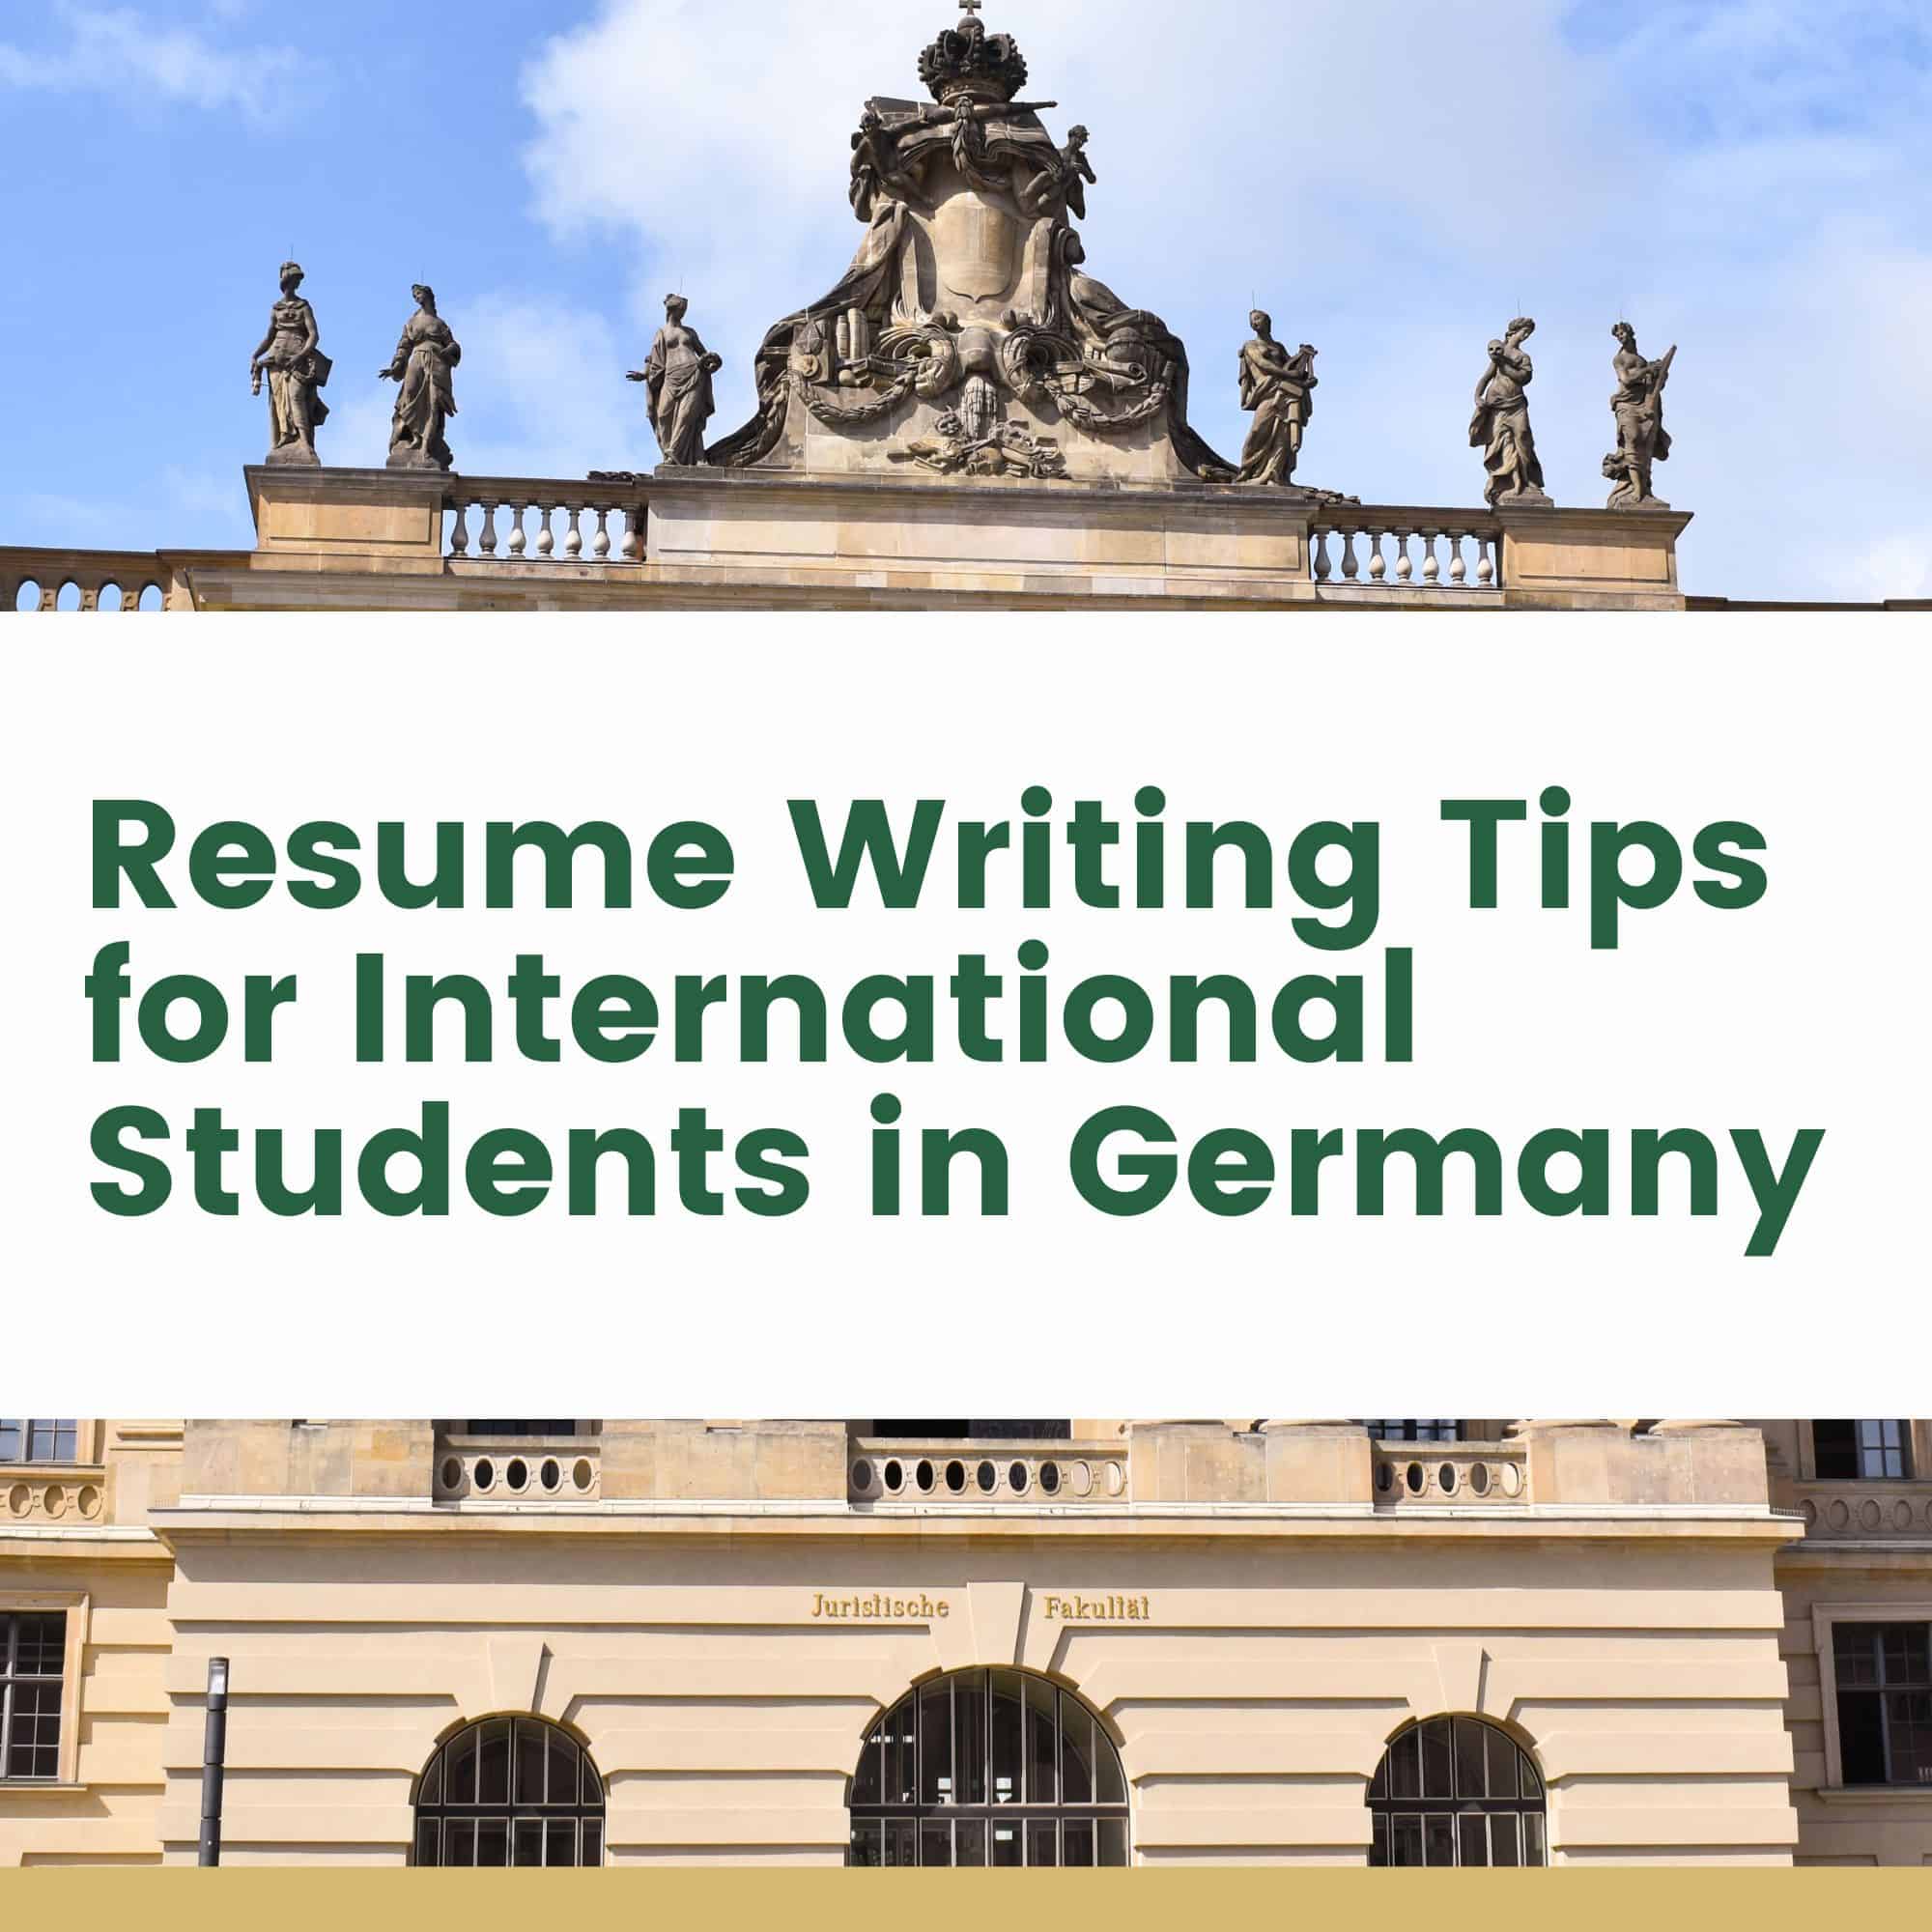 Resume Writing Tips for International Students in Germany